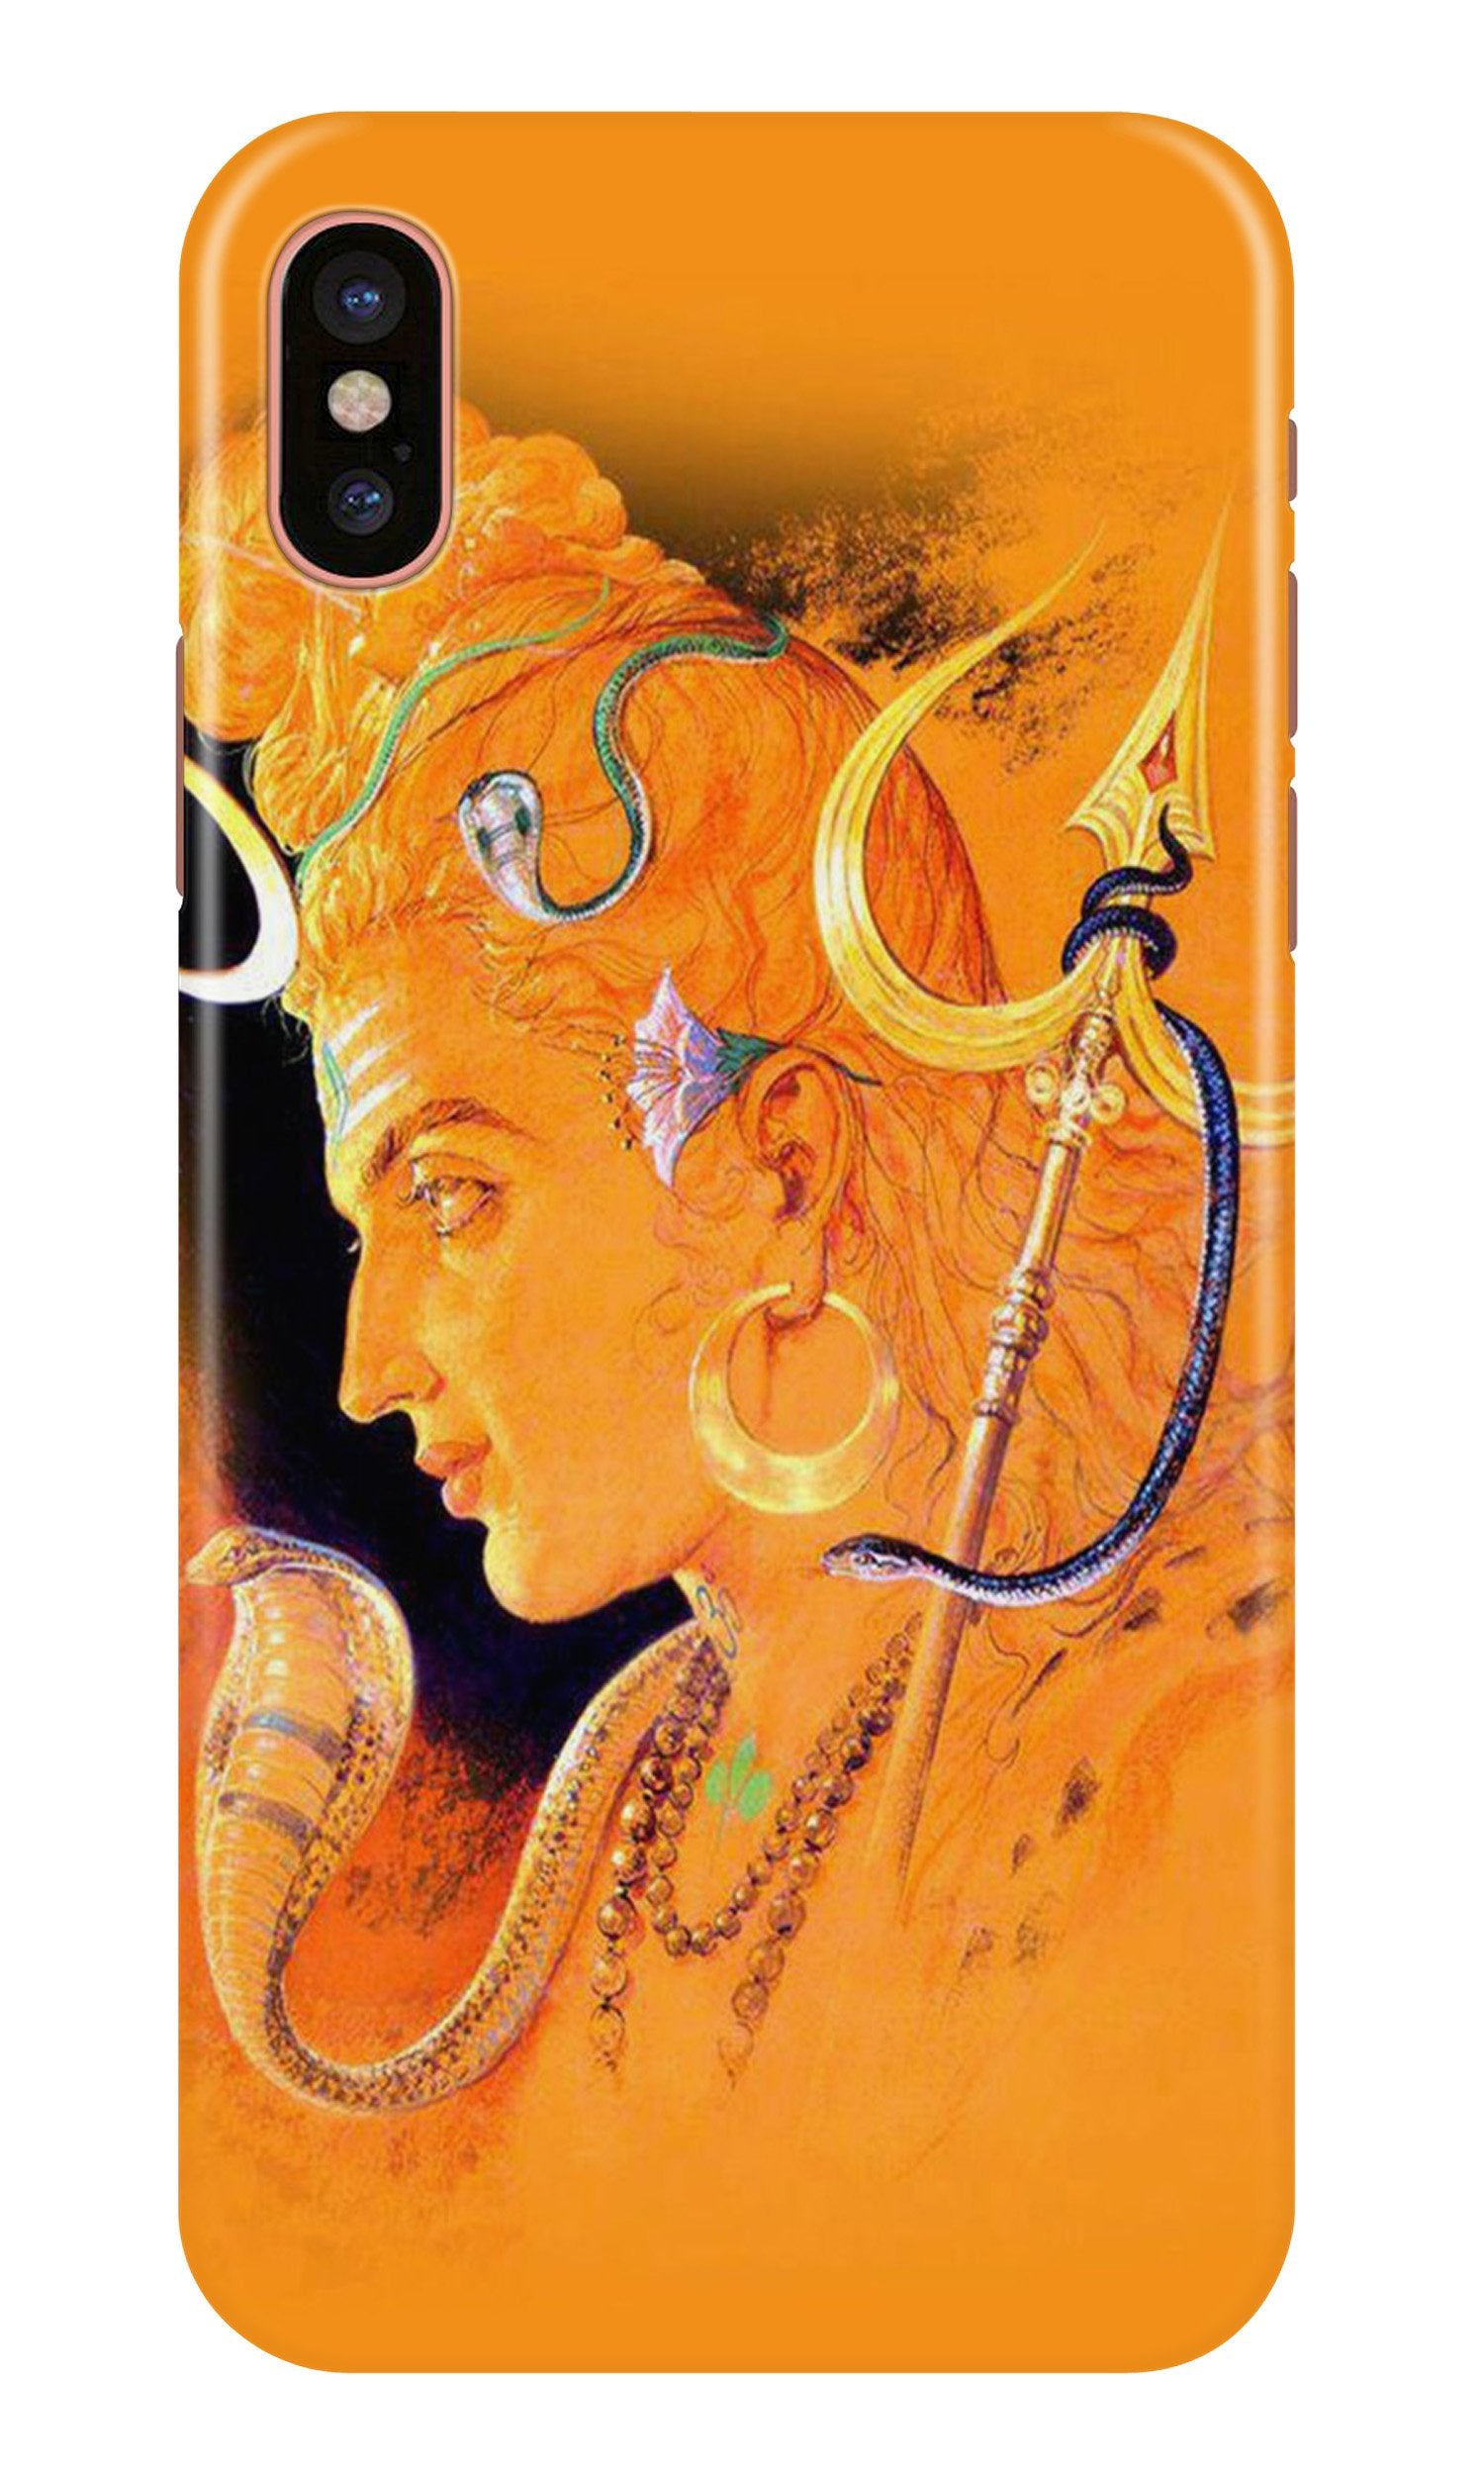 Lord Shiva Case for iPhone X (Design No. 293)